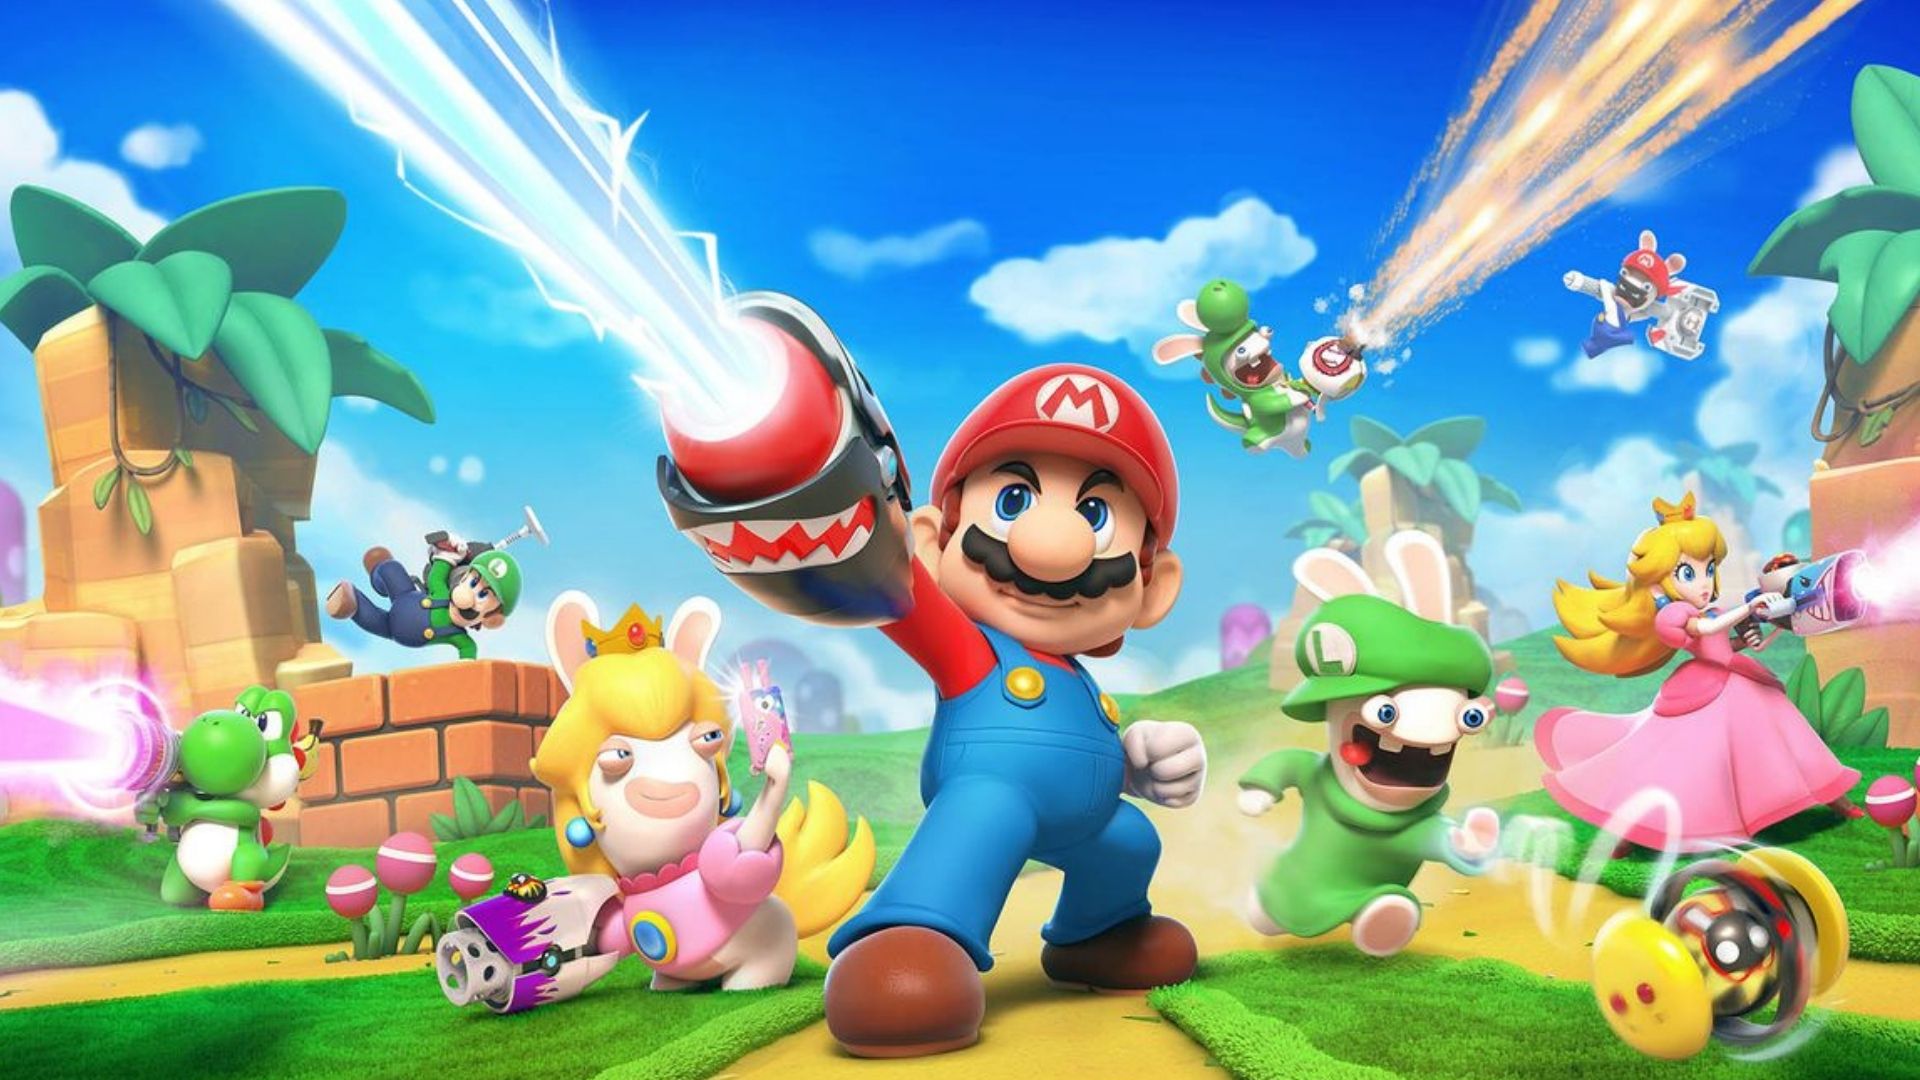 Mario and Rabbids Sparks Of Hope HD Wallpapers